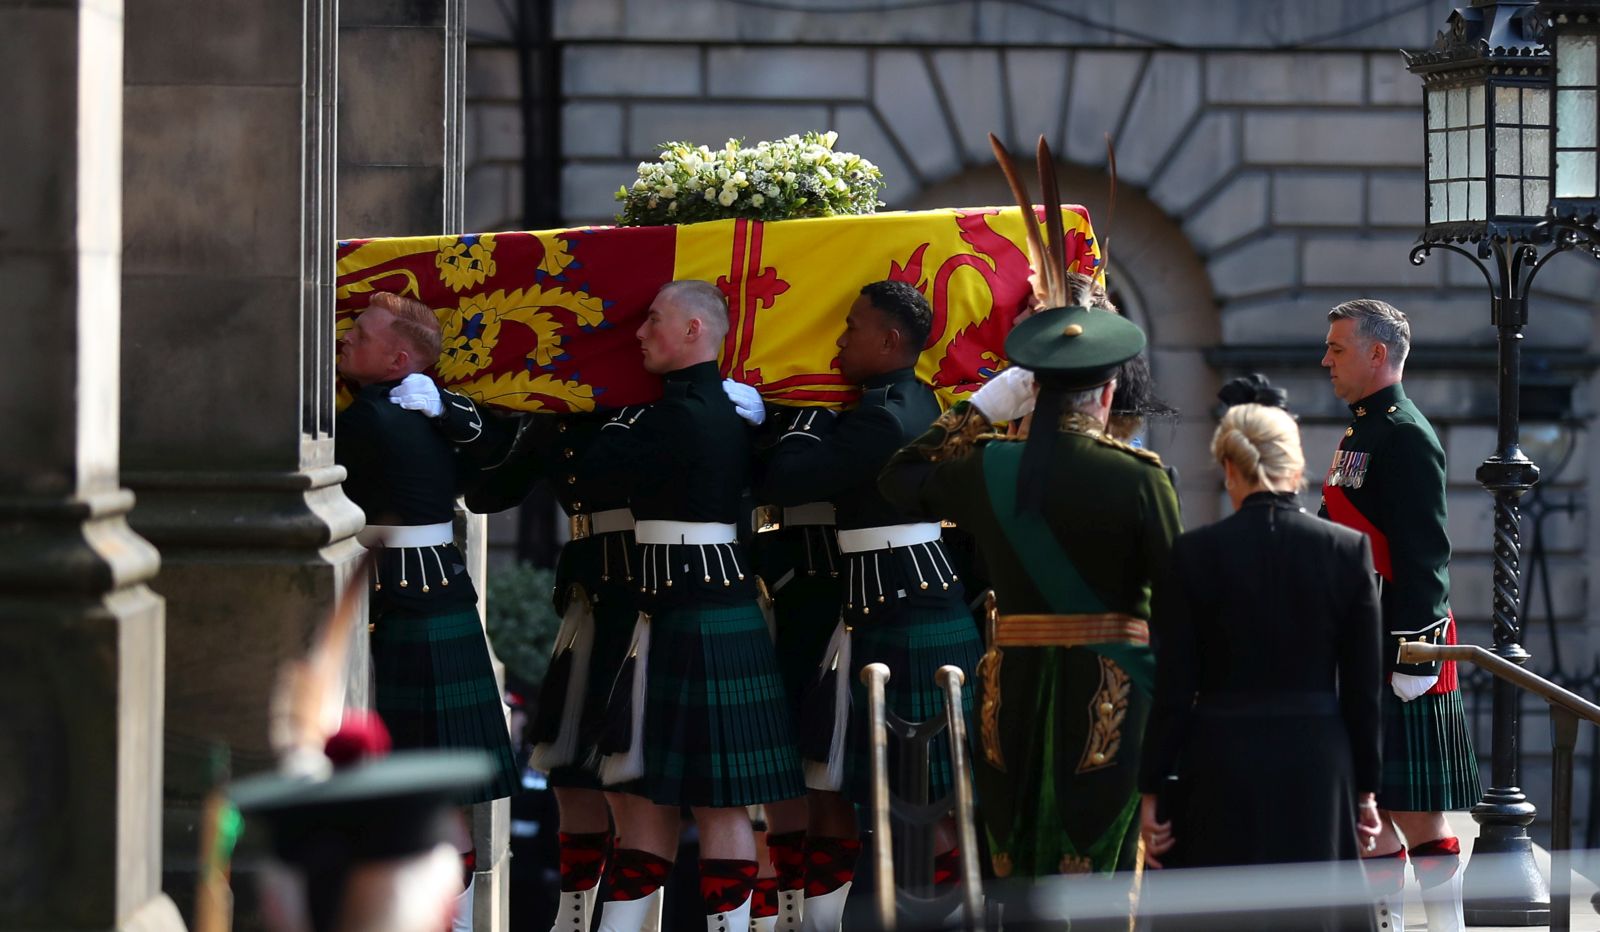 epa10179973 Royal guards carry the coffin with the body of Britain's Queen Elizabeth II into St Giles' Cathedral after a procession from the Palace of Holyroodhouse to accompanied by members of the royal family in Edinburgh, Scotland, Britain, 12 September 2022. Members of the public will be able to view the coffin to pay their respects for 24 hours before it is taken to London ahead of a period of lying in state.  EPA/NUNO VEIGA